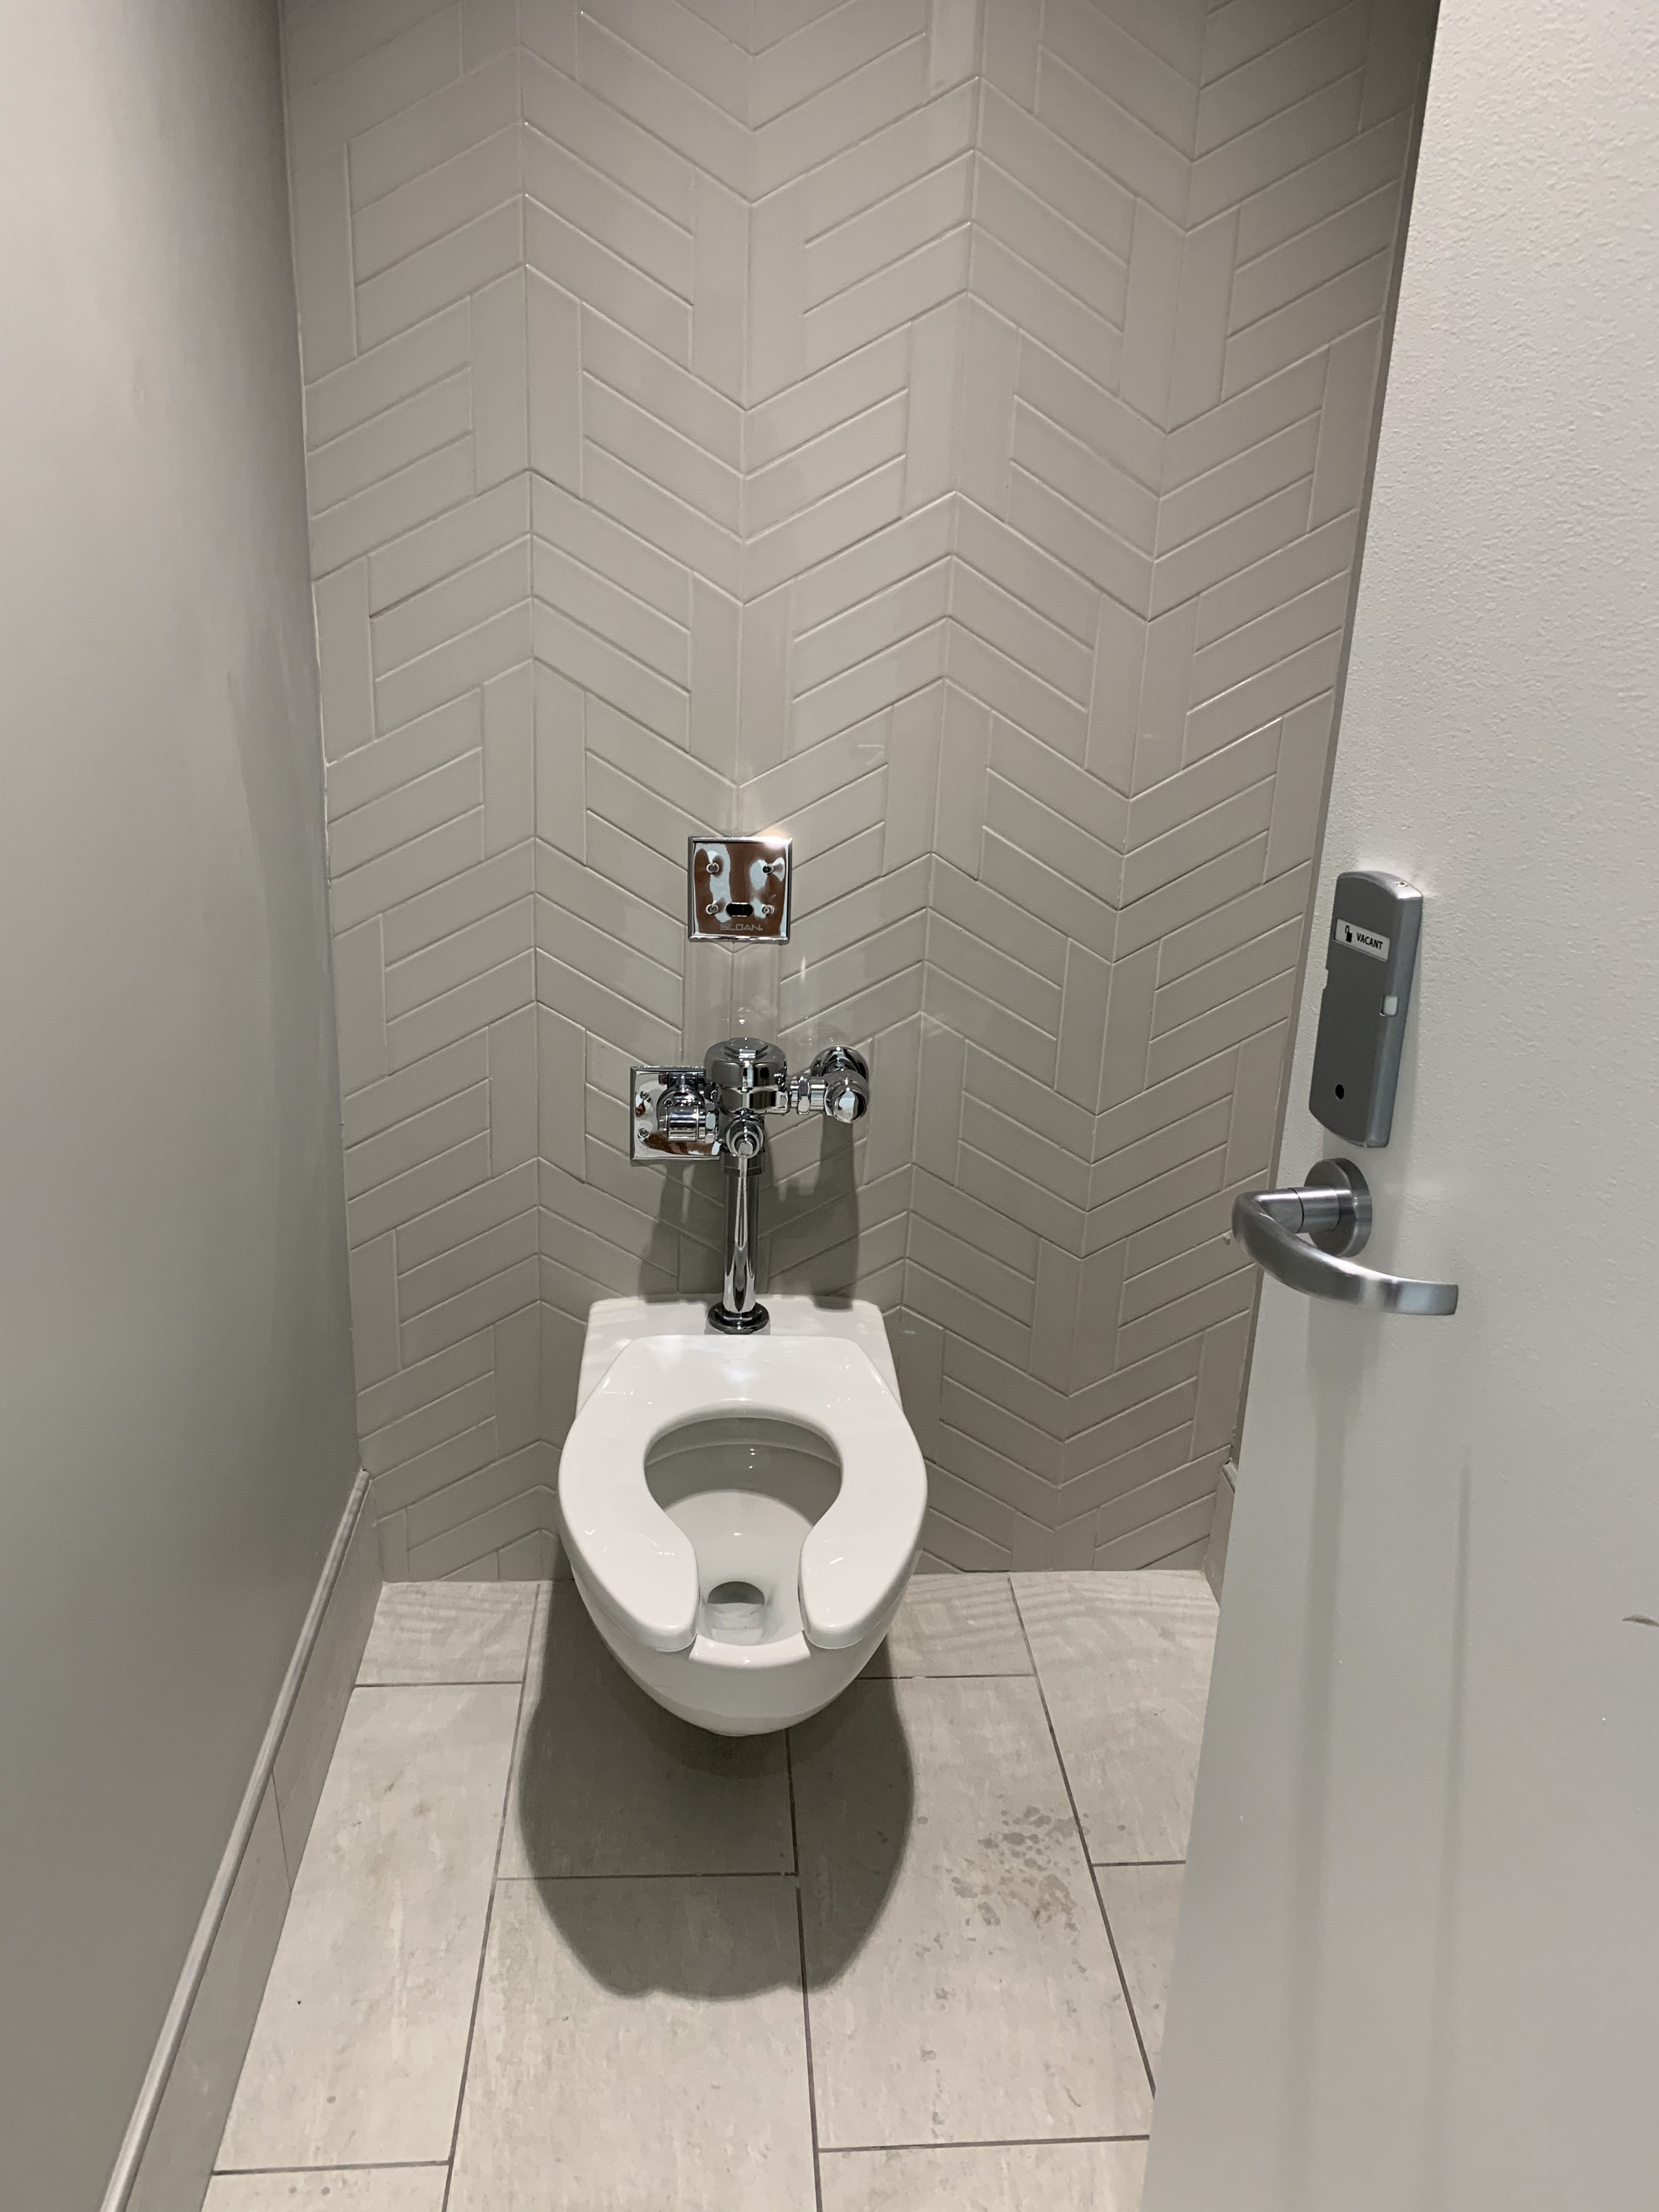 A private toilet room at Greensview